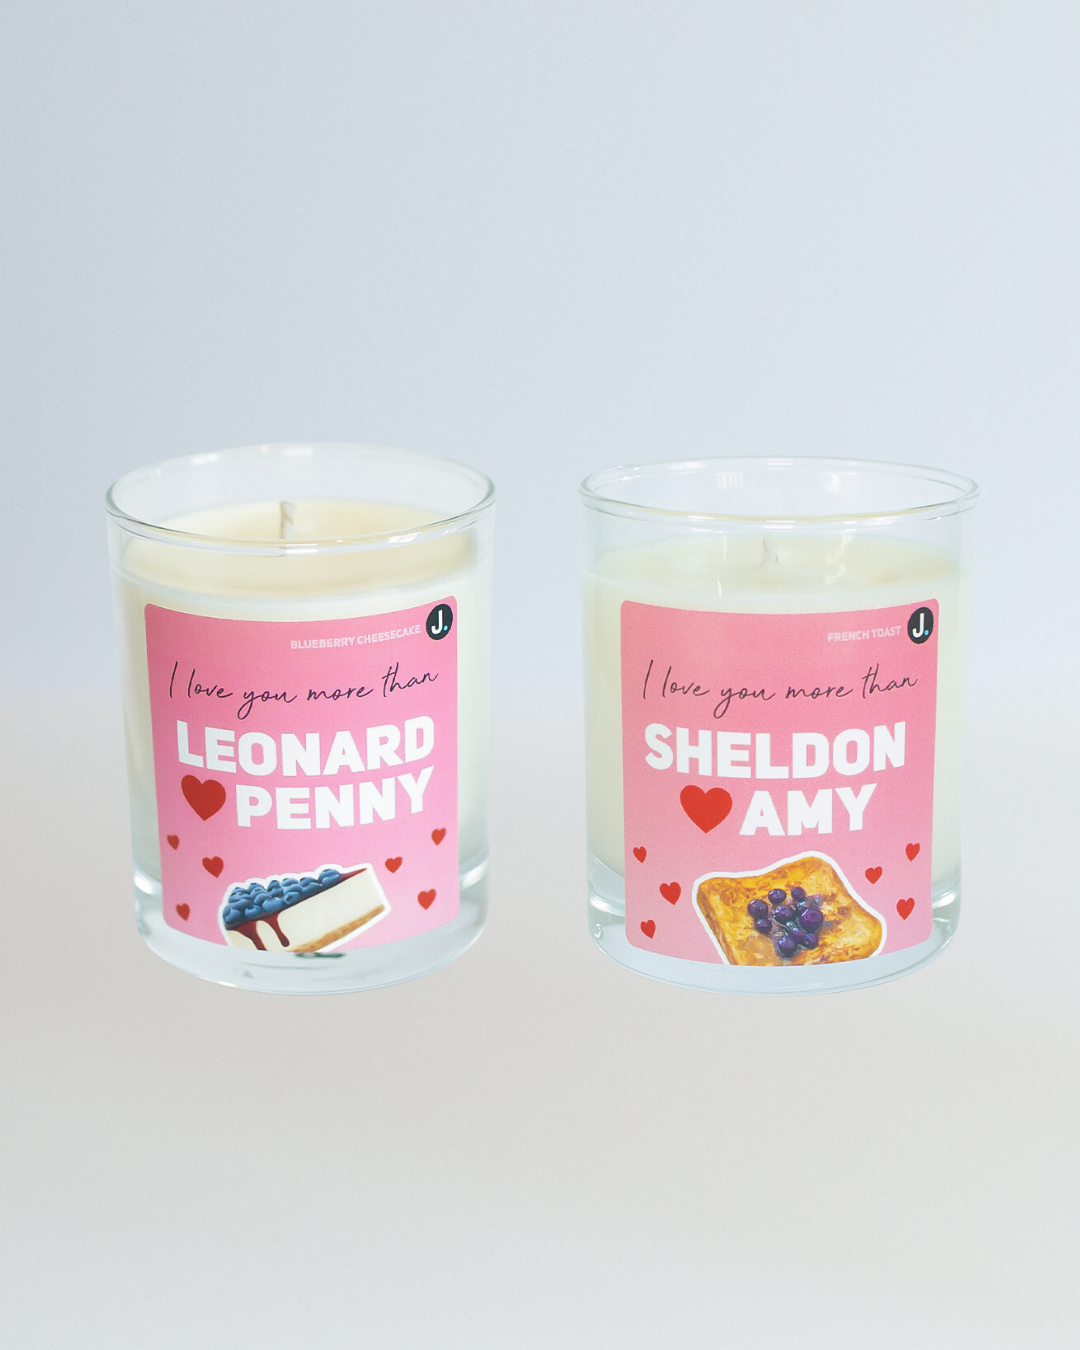 Leonard & Penny (Blueberry Cheesecake) The Big Bang Theory Inspired Candle - The Big Bang Theory Inspired Candle